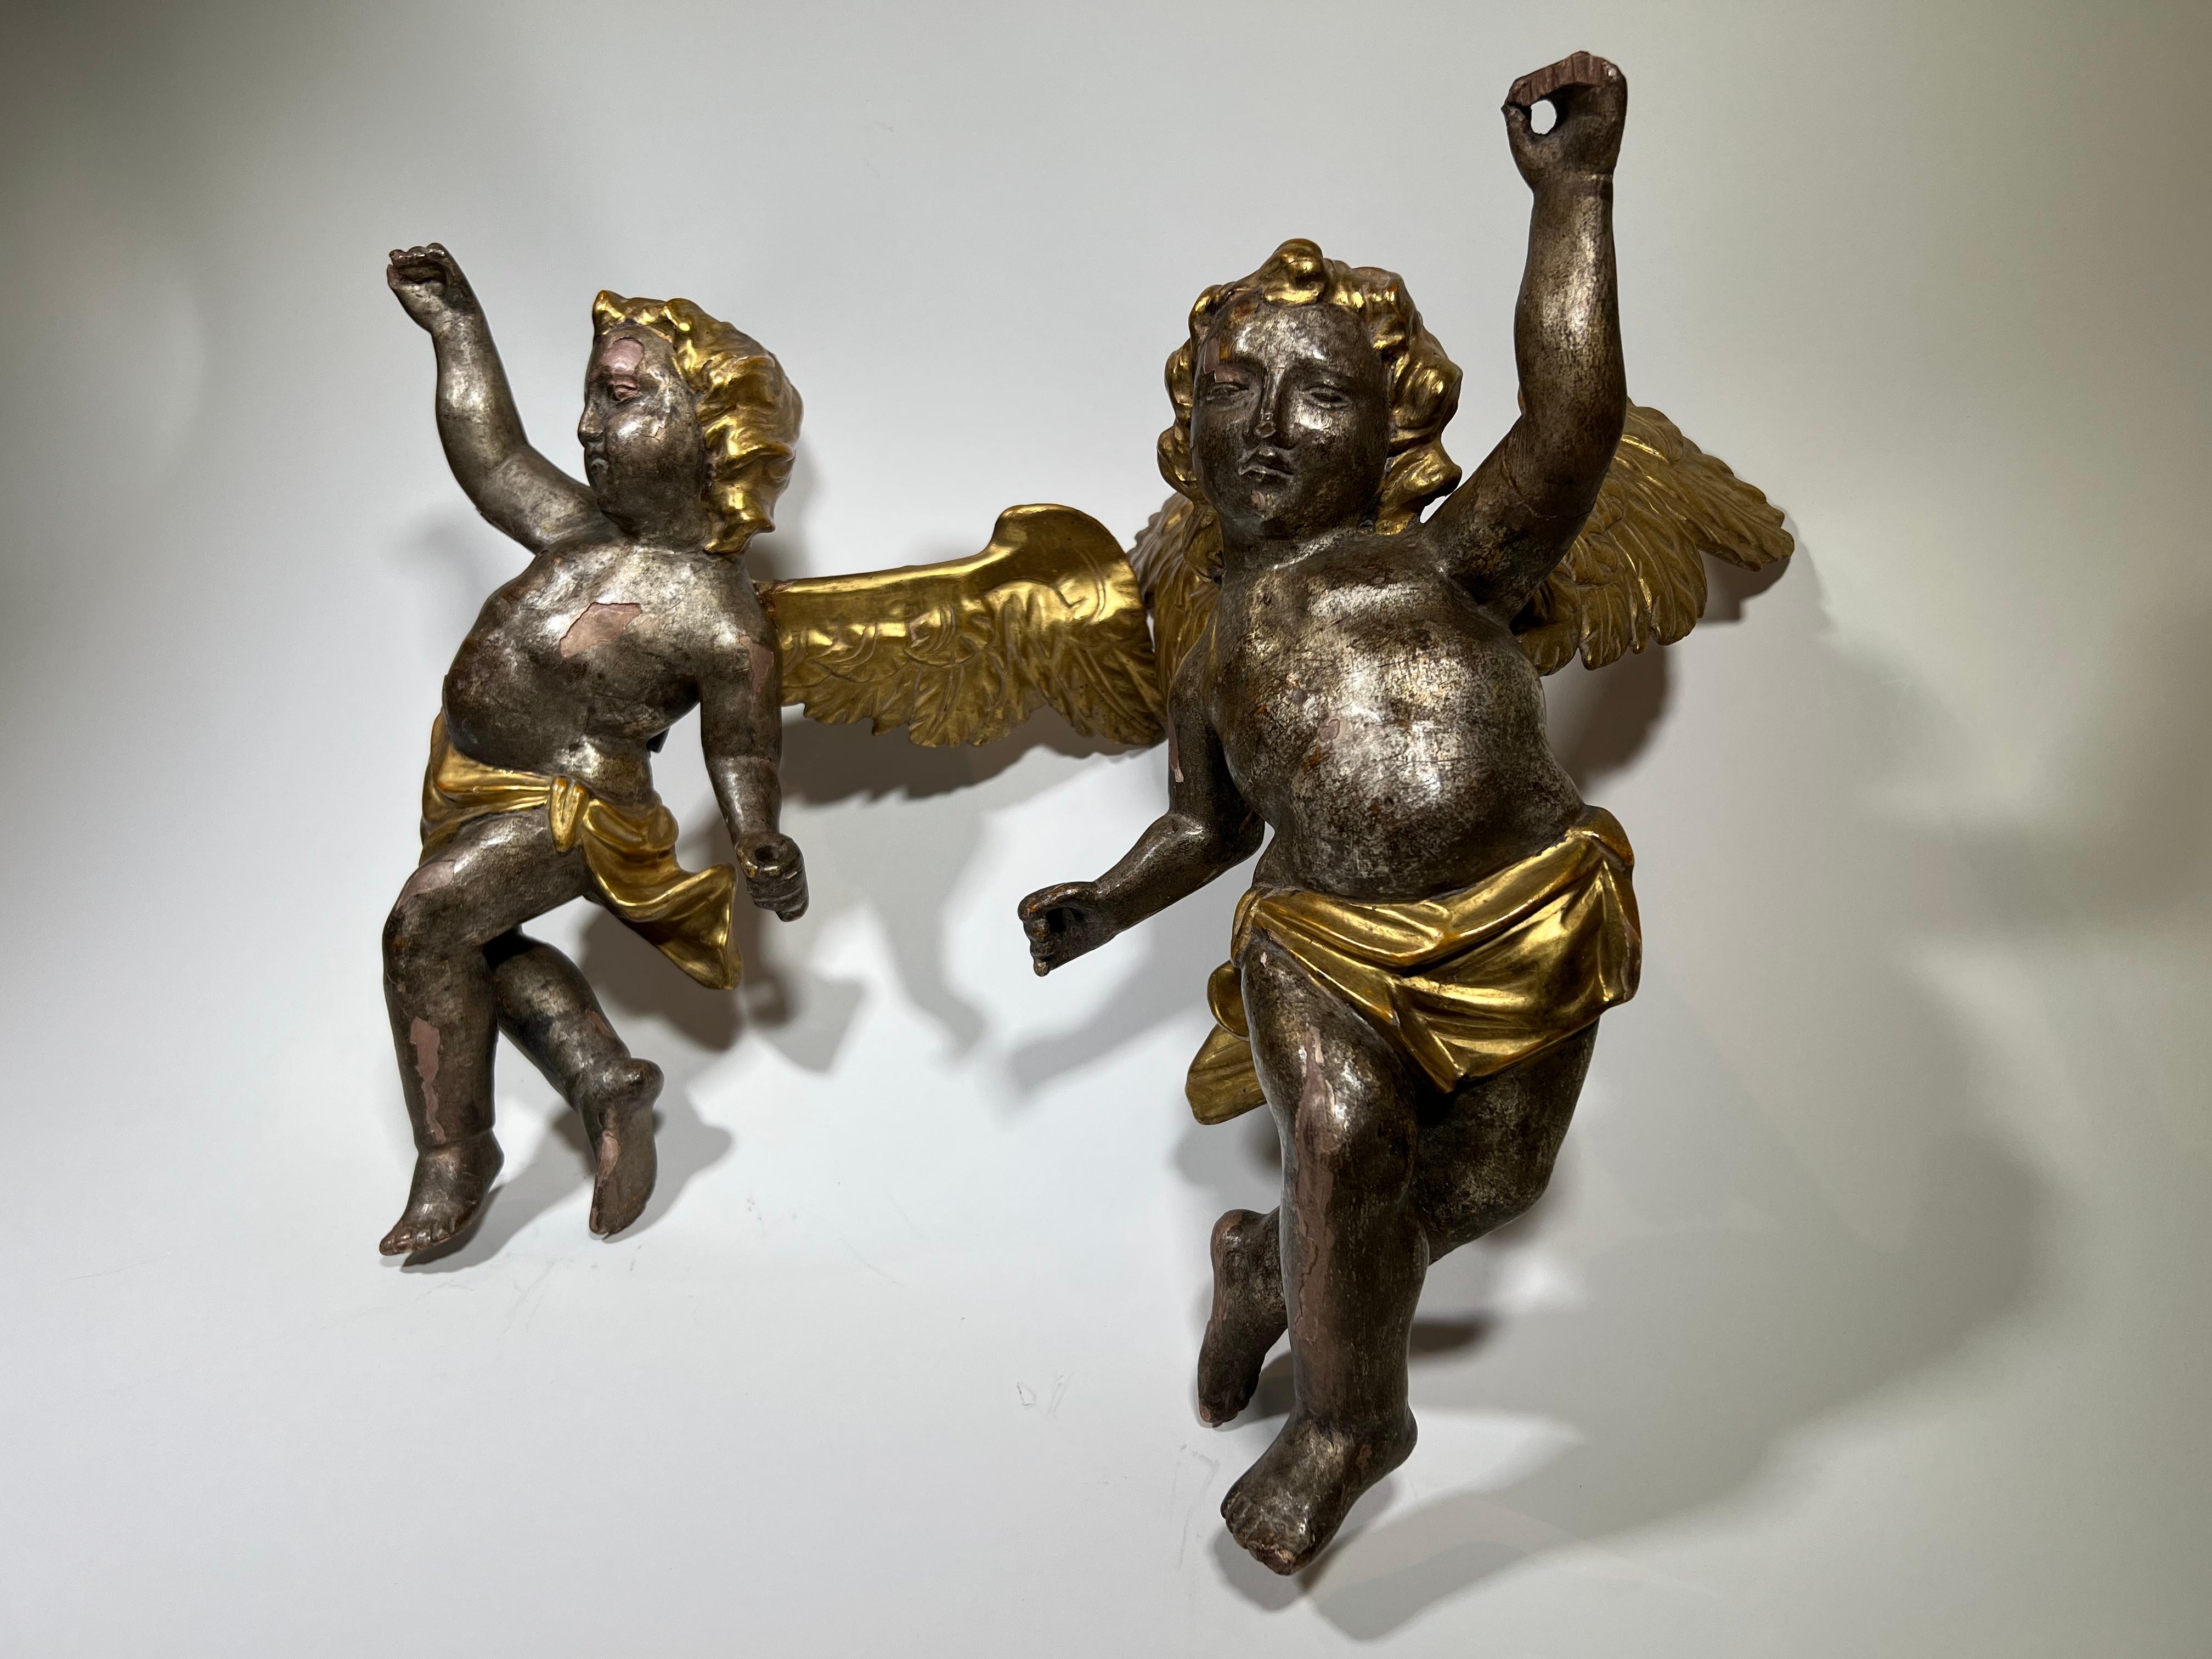 A delightful pair of 18th century Italian puttini or cherubs in giltwood. Wonderfully carved with delicate features - lending this pair elegance and charm.